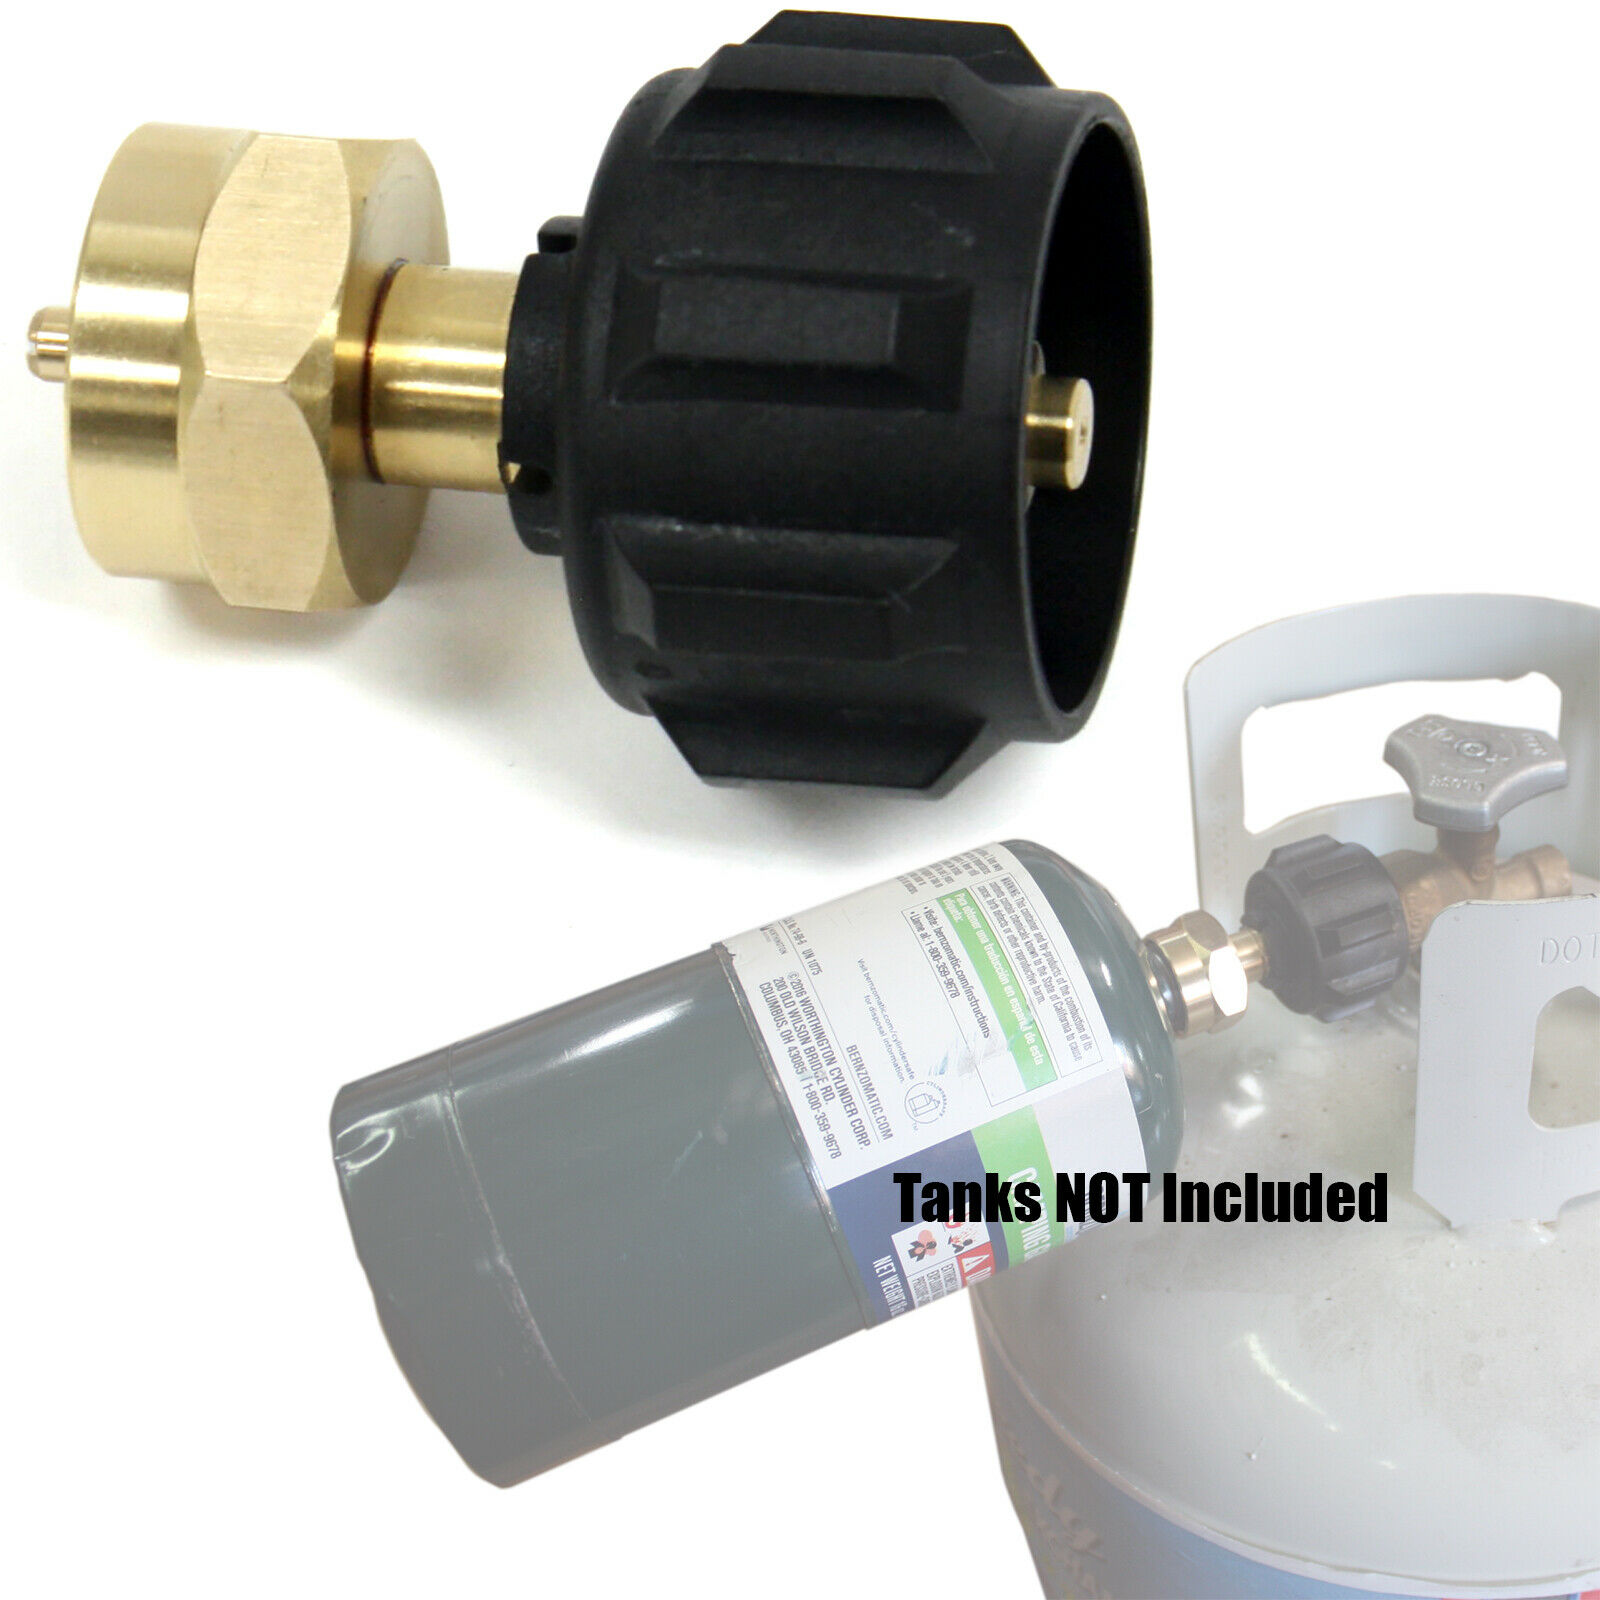 Details about   Refill Adapter for QCC1/Type1 20lb LP Propane Tank and 1lb Tank Throwaway 